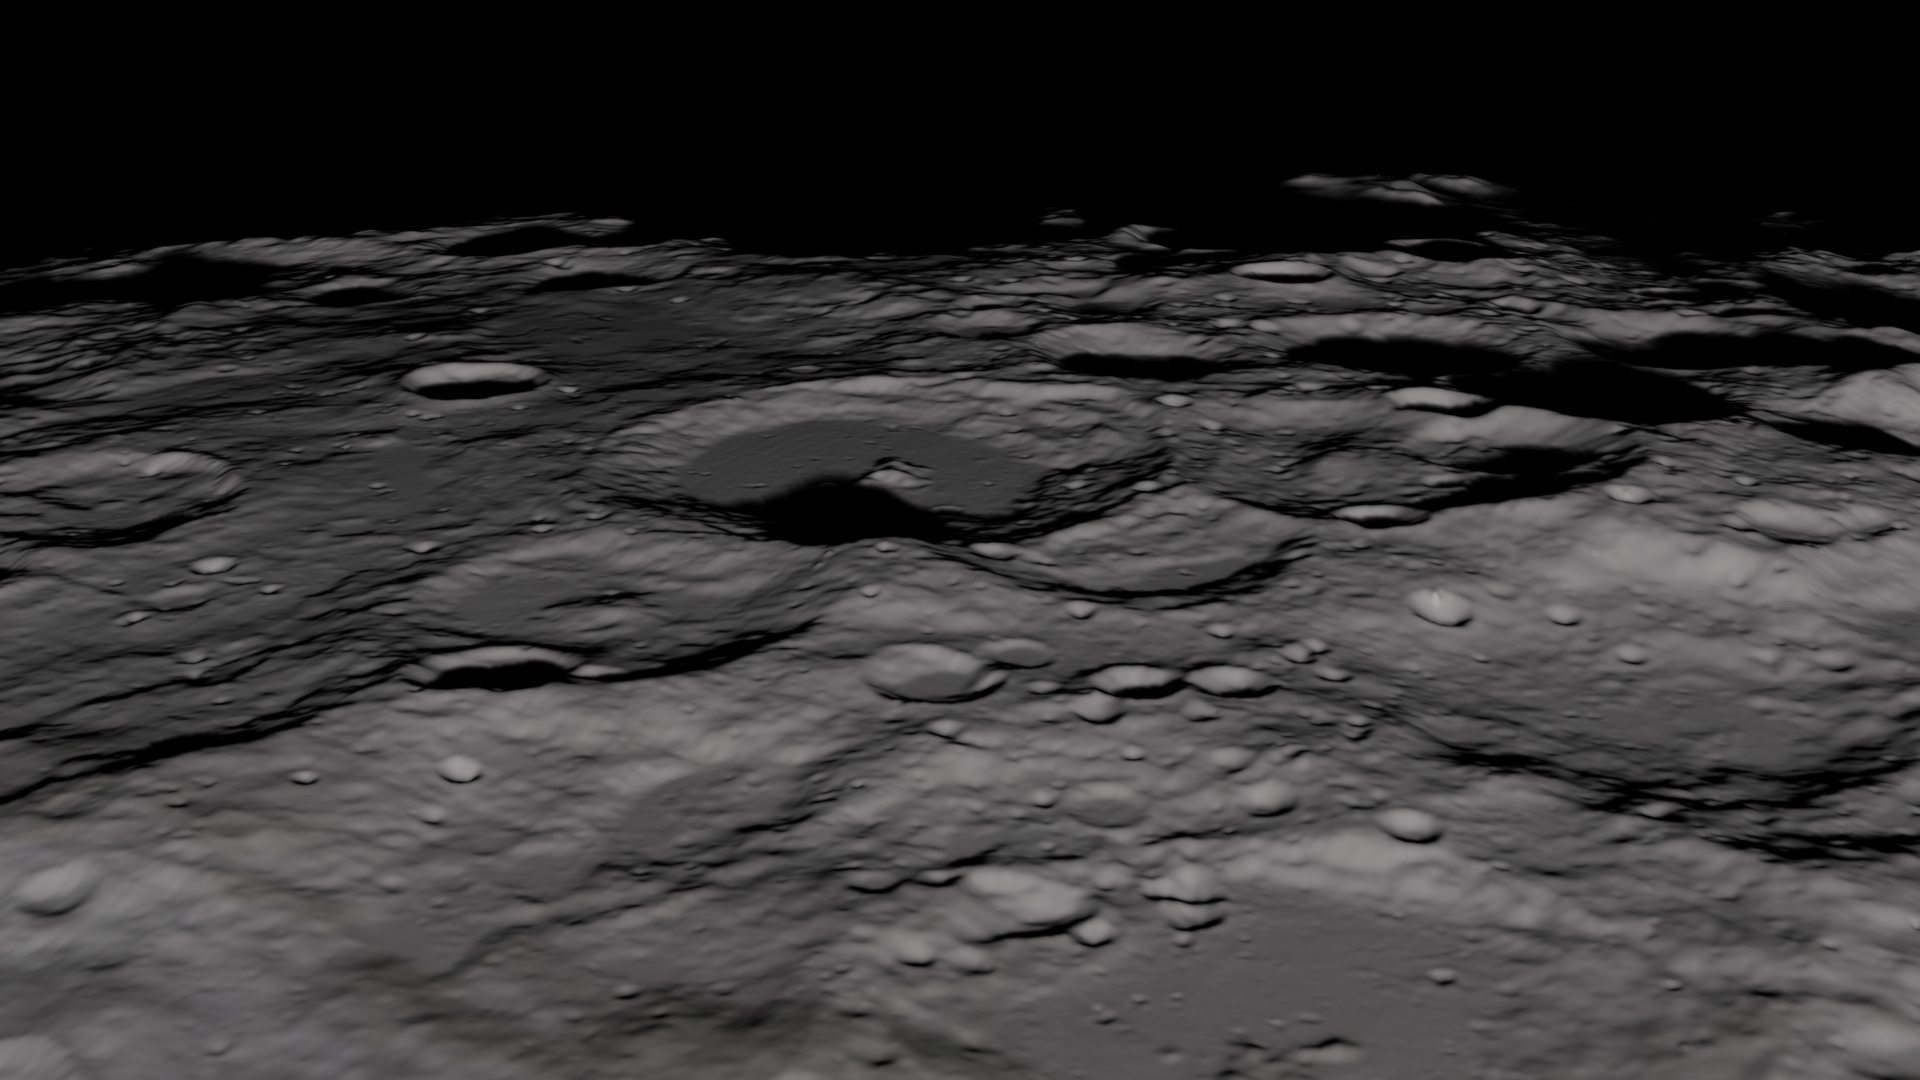 This animation flys around the moon's south pole.  Some of the craters on this tour are: Amundsen, Cabeus, Haworth, Faustini, Malapert, Laveran, Scott, Shackleton, Shoemaker, and Wiechert